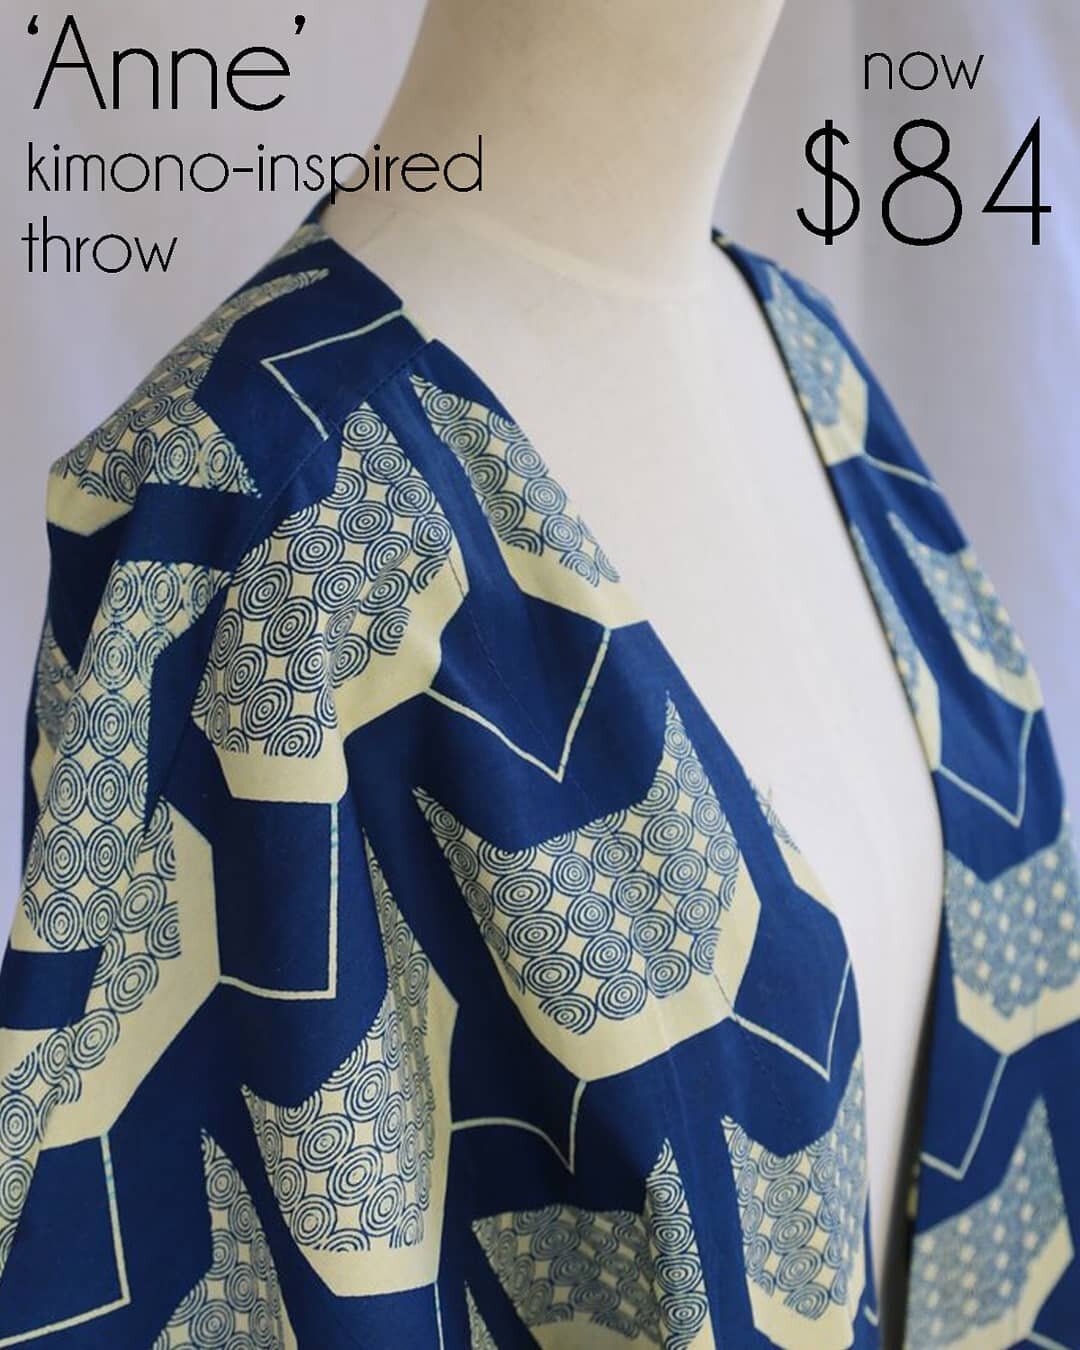 This piece takes inspiration from all over time and space! A blend of traditional japanese kimono meets the glam of the 1920s boudoir glam - made in a richly dyed prussian blue and cream african printed 100% cotton.
This piece is perfect on the beach